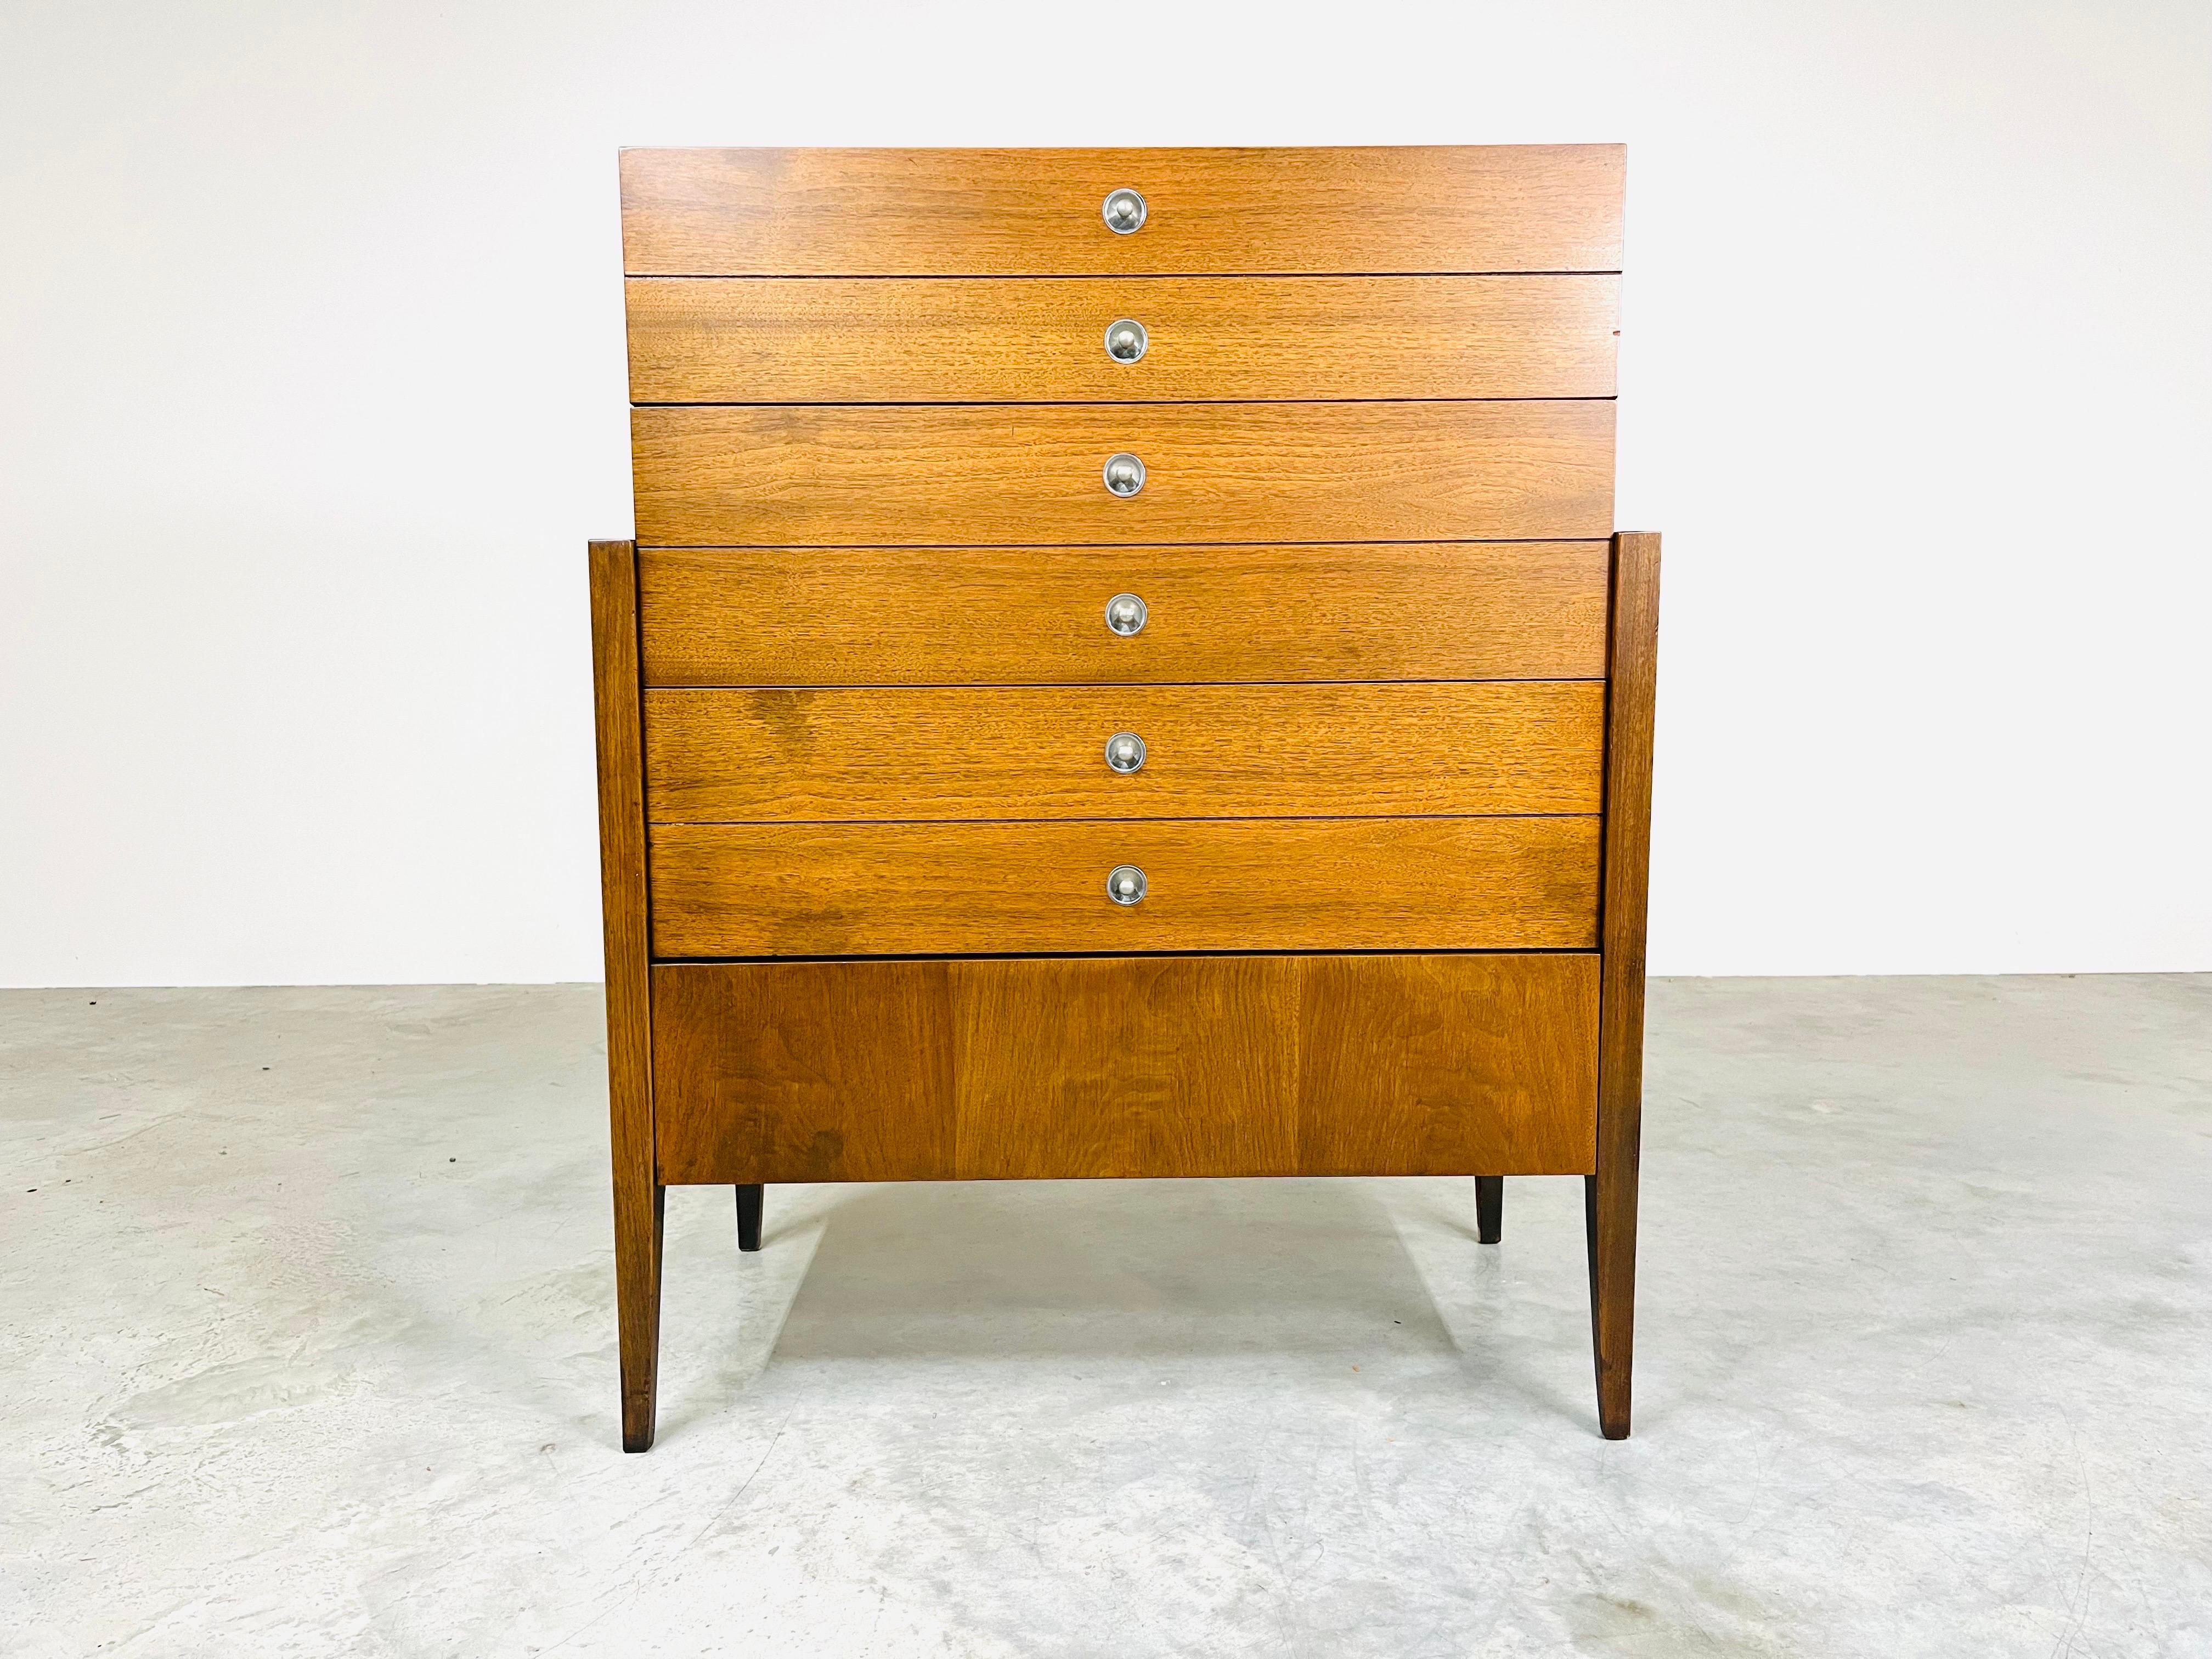 Seldom seen tall dresser in walnut having 4 deep drawers with ample storage and Paul McCobb style drawer pulls. Stunning lines for this case designed to appear as though it’s set on a tapered leg support frame. 
Bassett Circa 1960
In excellent